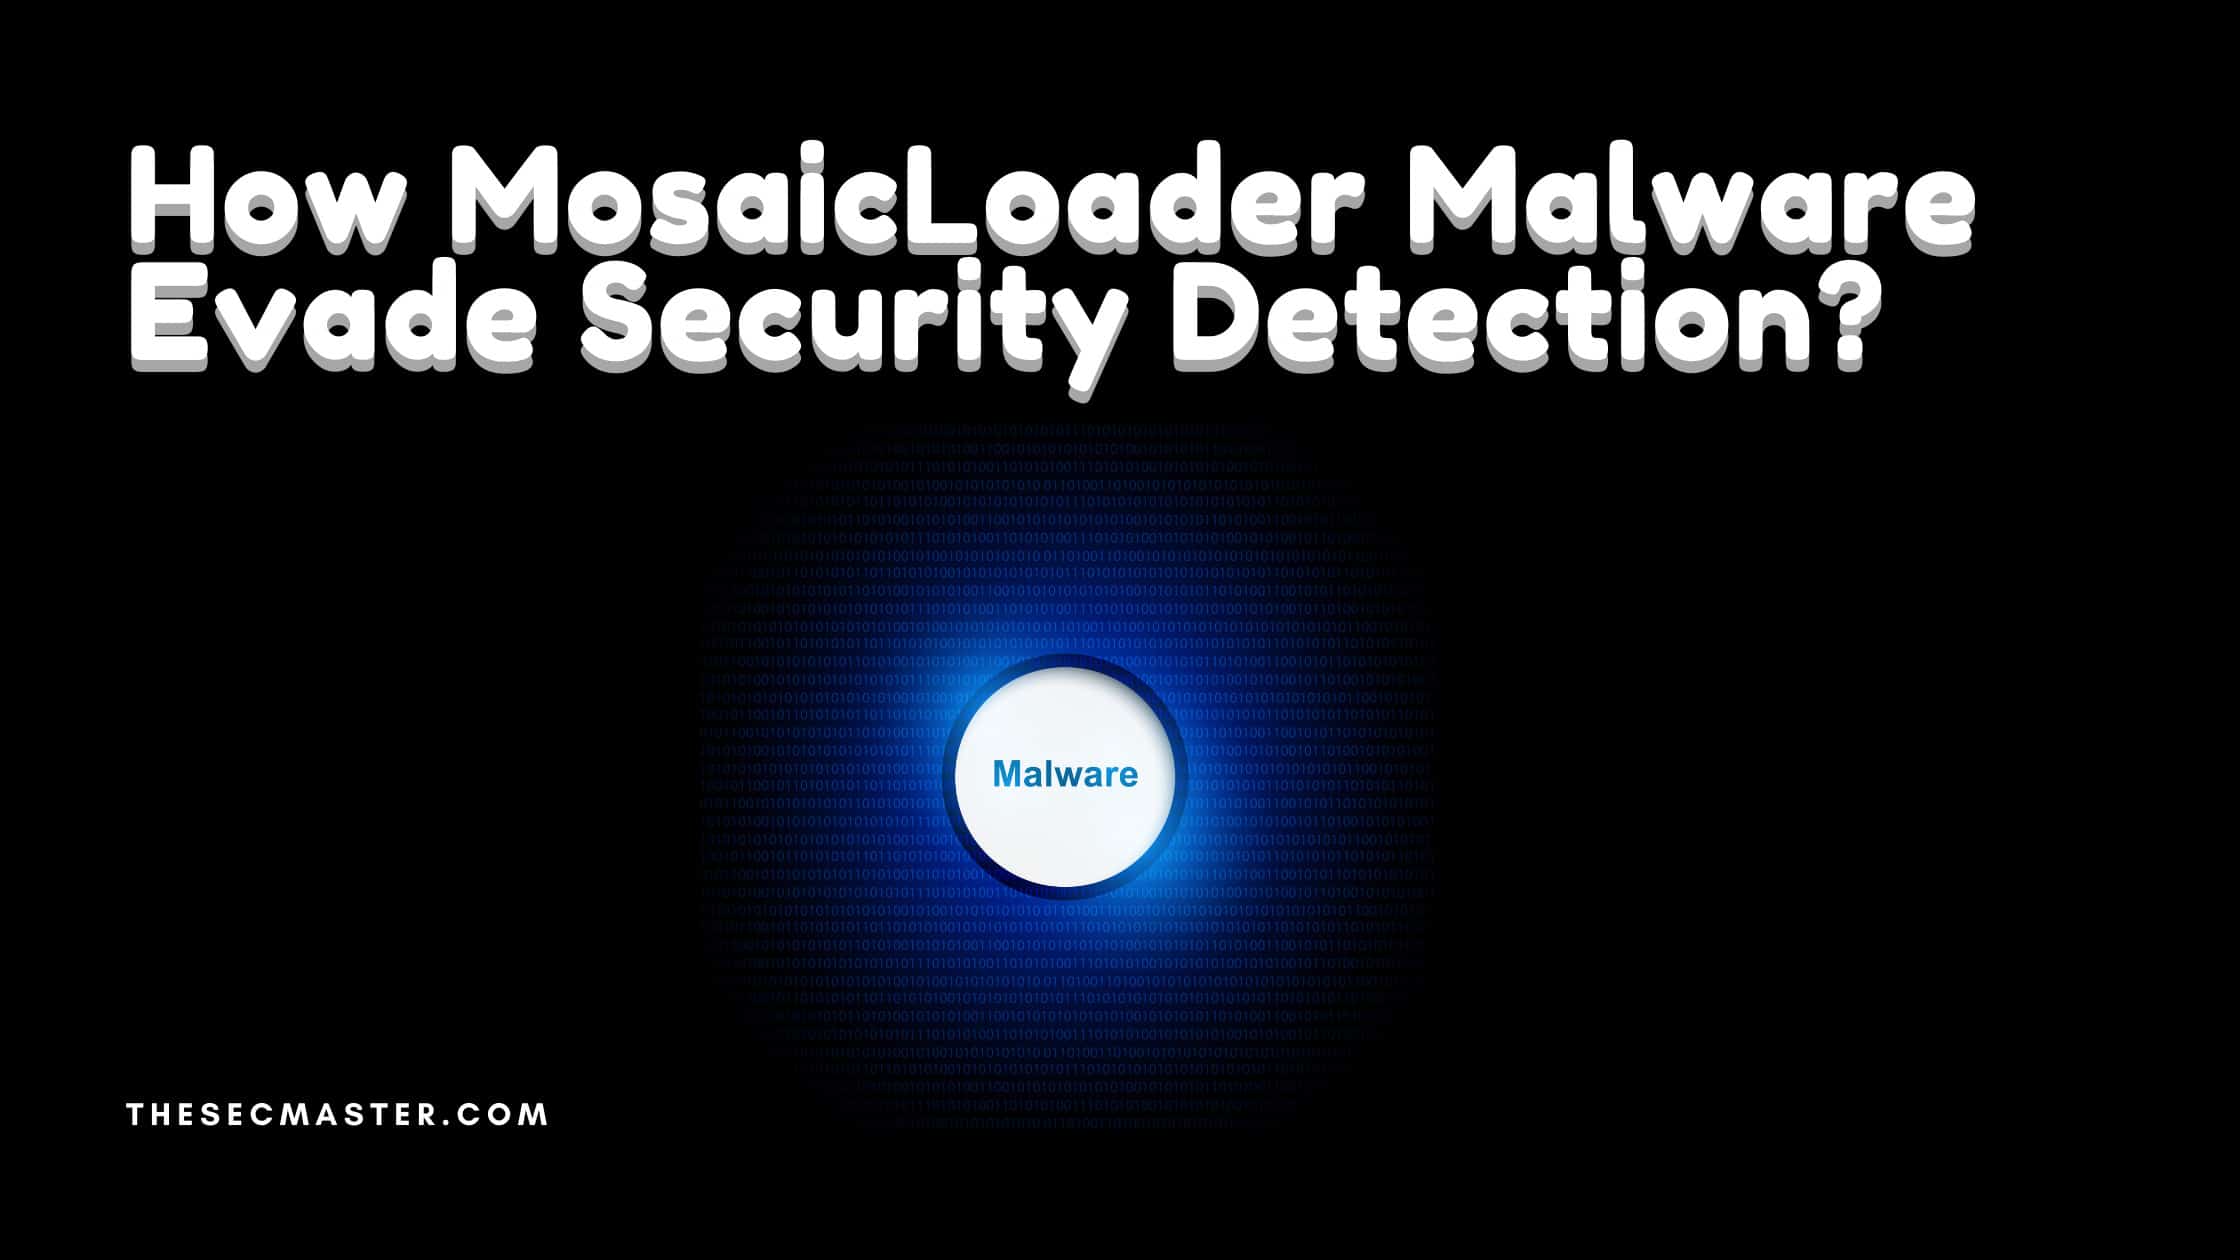 How Mosaicloader Malware Evade Security Detection